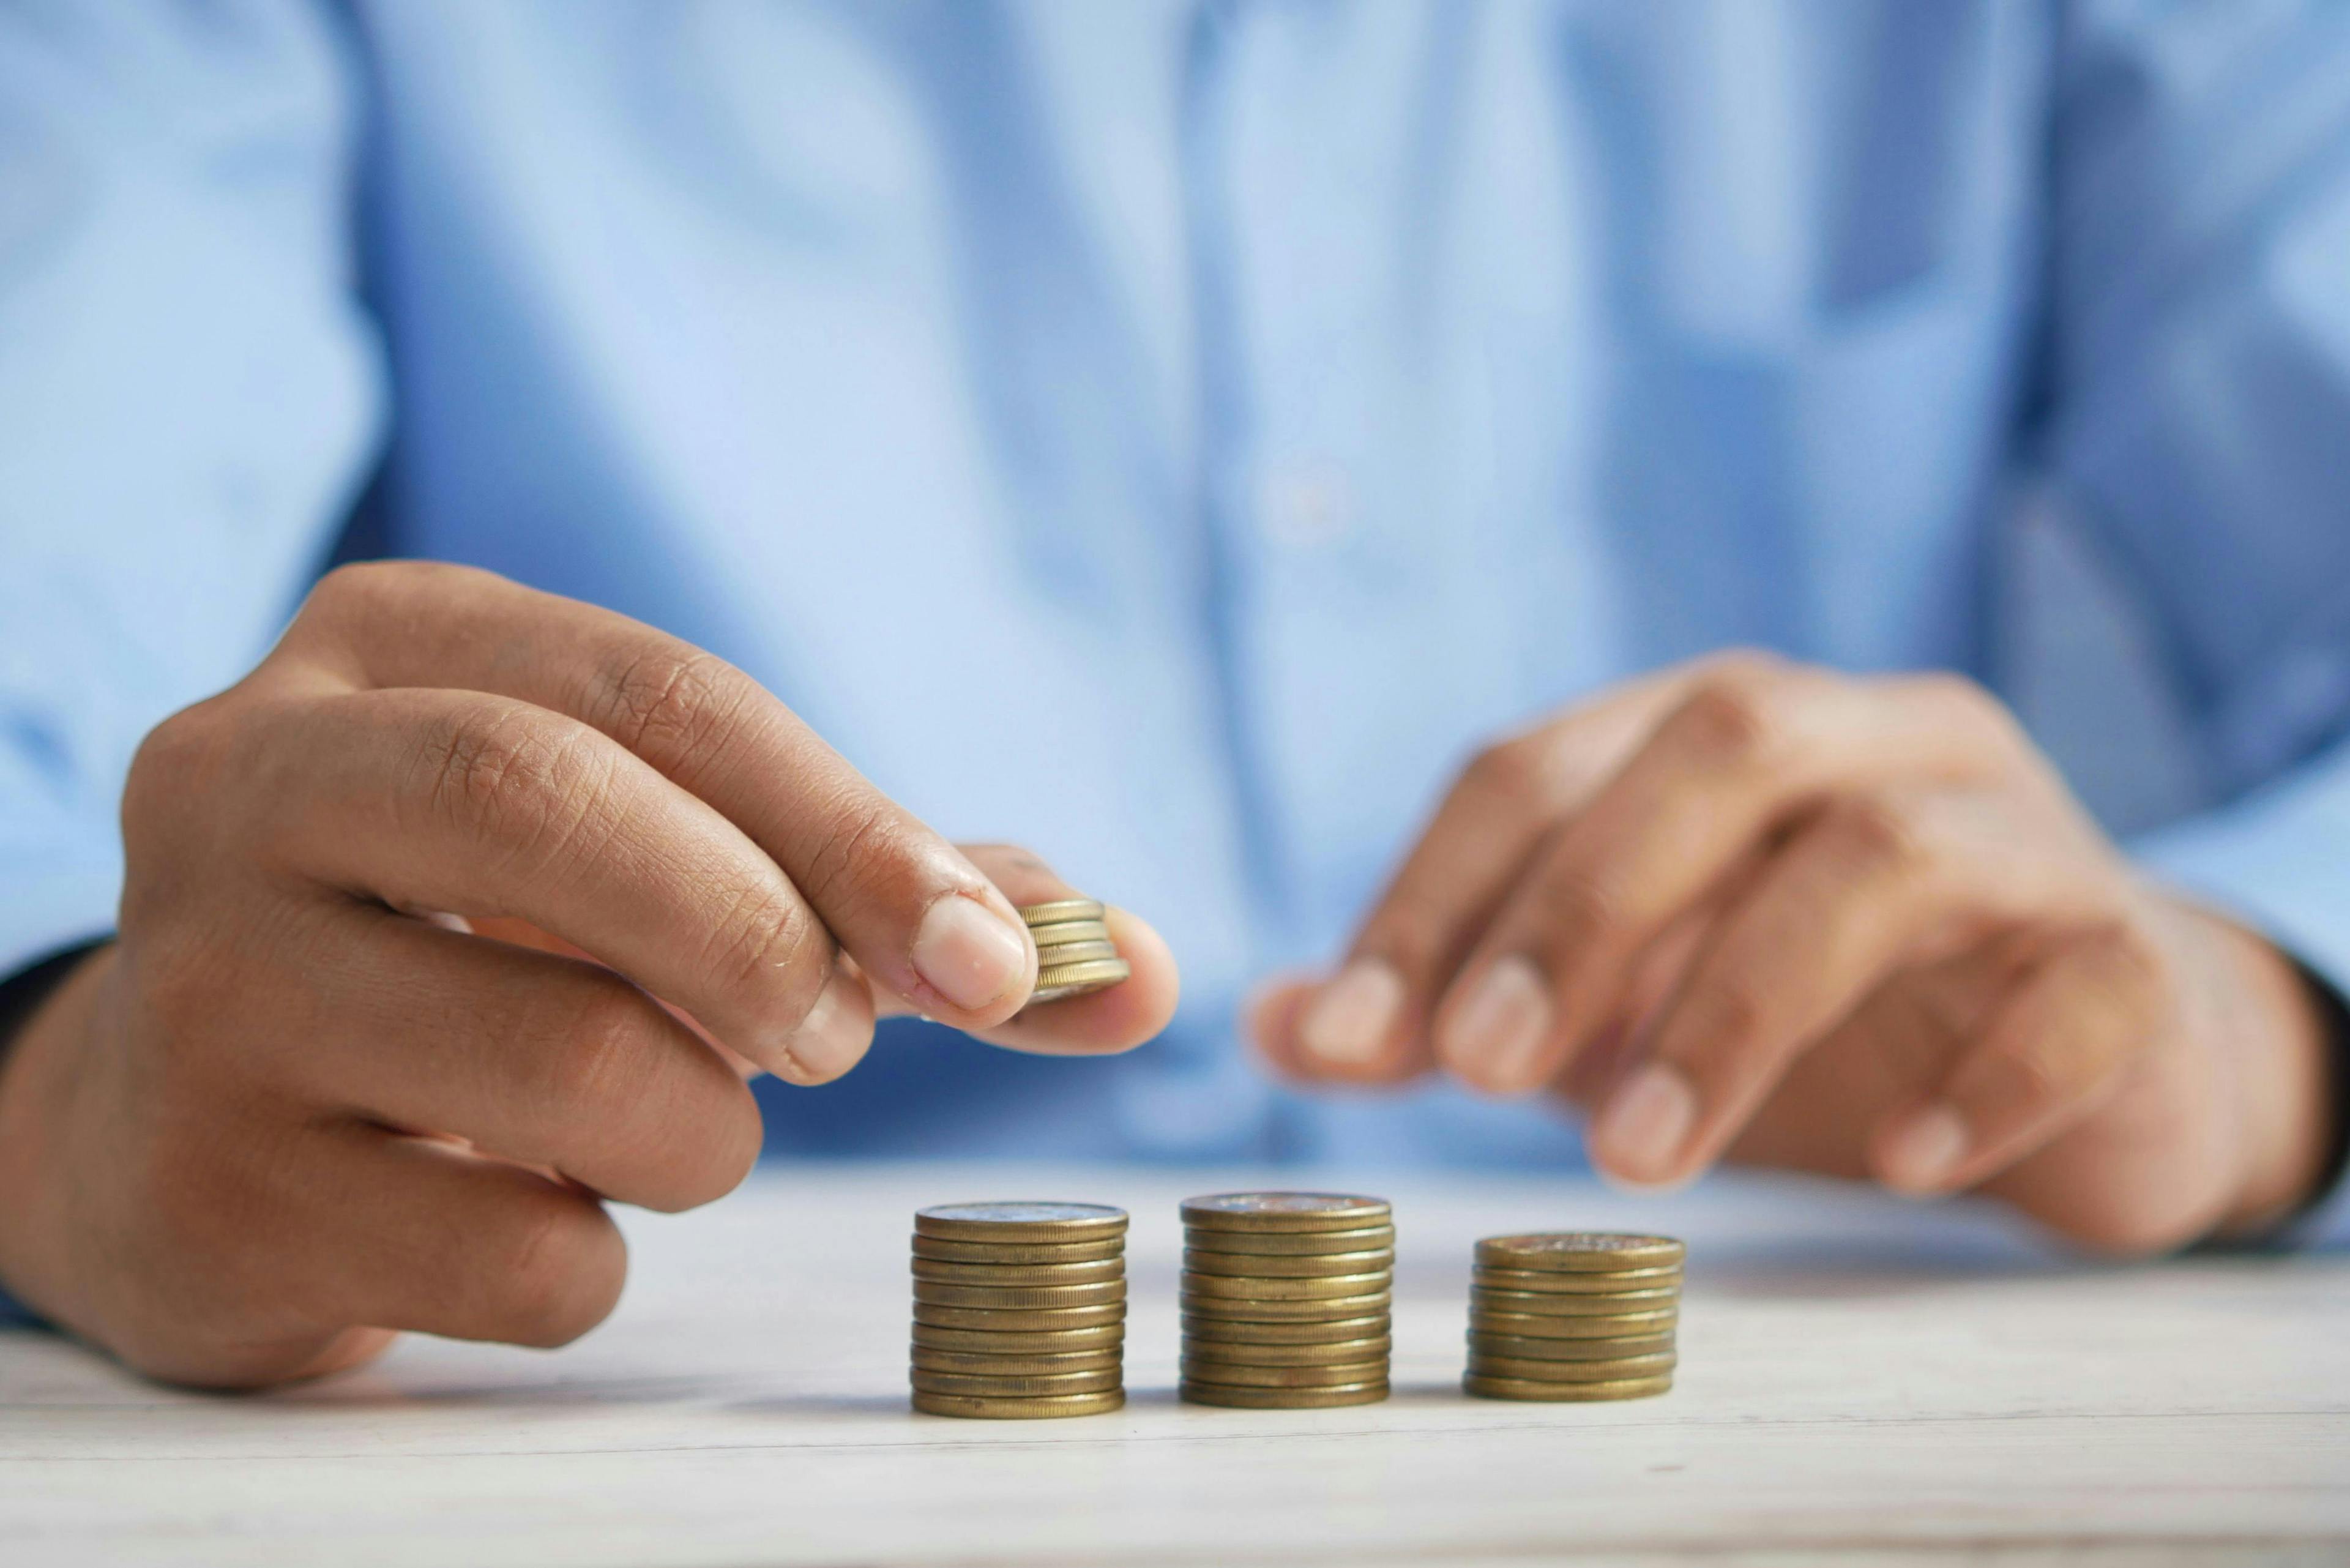 Hands stack coins on a white table, arranging three columns; the person wears a blue shirt, suggesting a context of financial planning or saving.